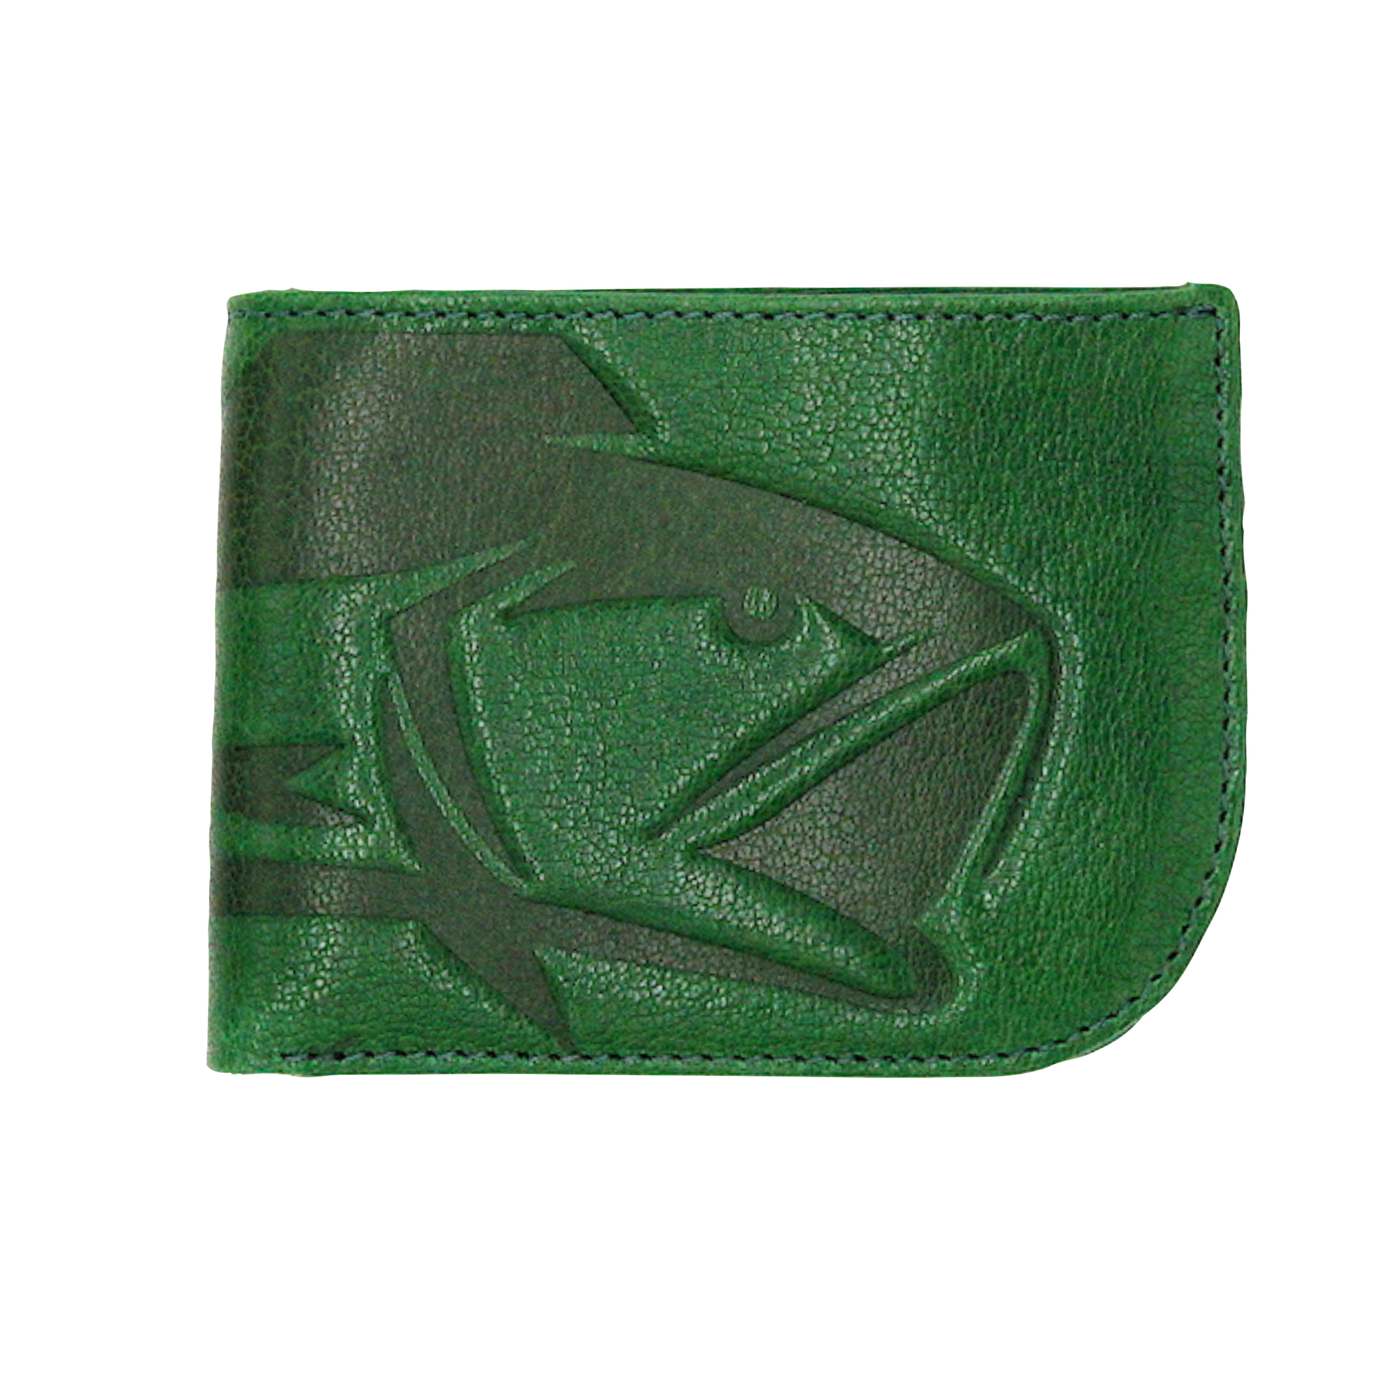 The Pursuit Bifold Radius Bass Wallet reflects the true elements of the angler with bold hand-dyed color, premier full grain leather, and a stylish debossed bass logo. Perfect for the avid fisher. 6 Hi-Viz Interior Card Slots 2 Storage Pockets Full-Length Bill Compartment Modern Style & Design Radius Comfort Corners Dimensions: 4.5"L x 3.5"H RFID Protection Color: Moss